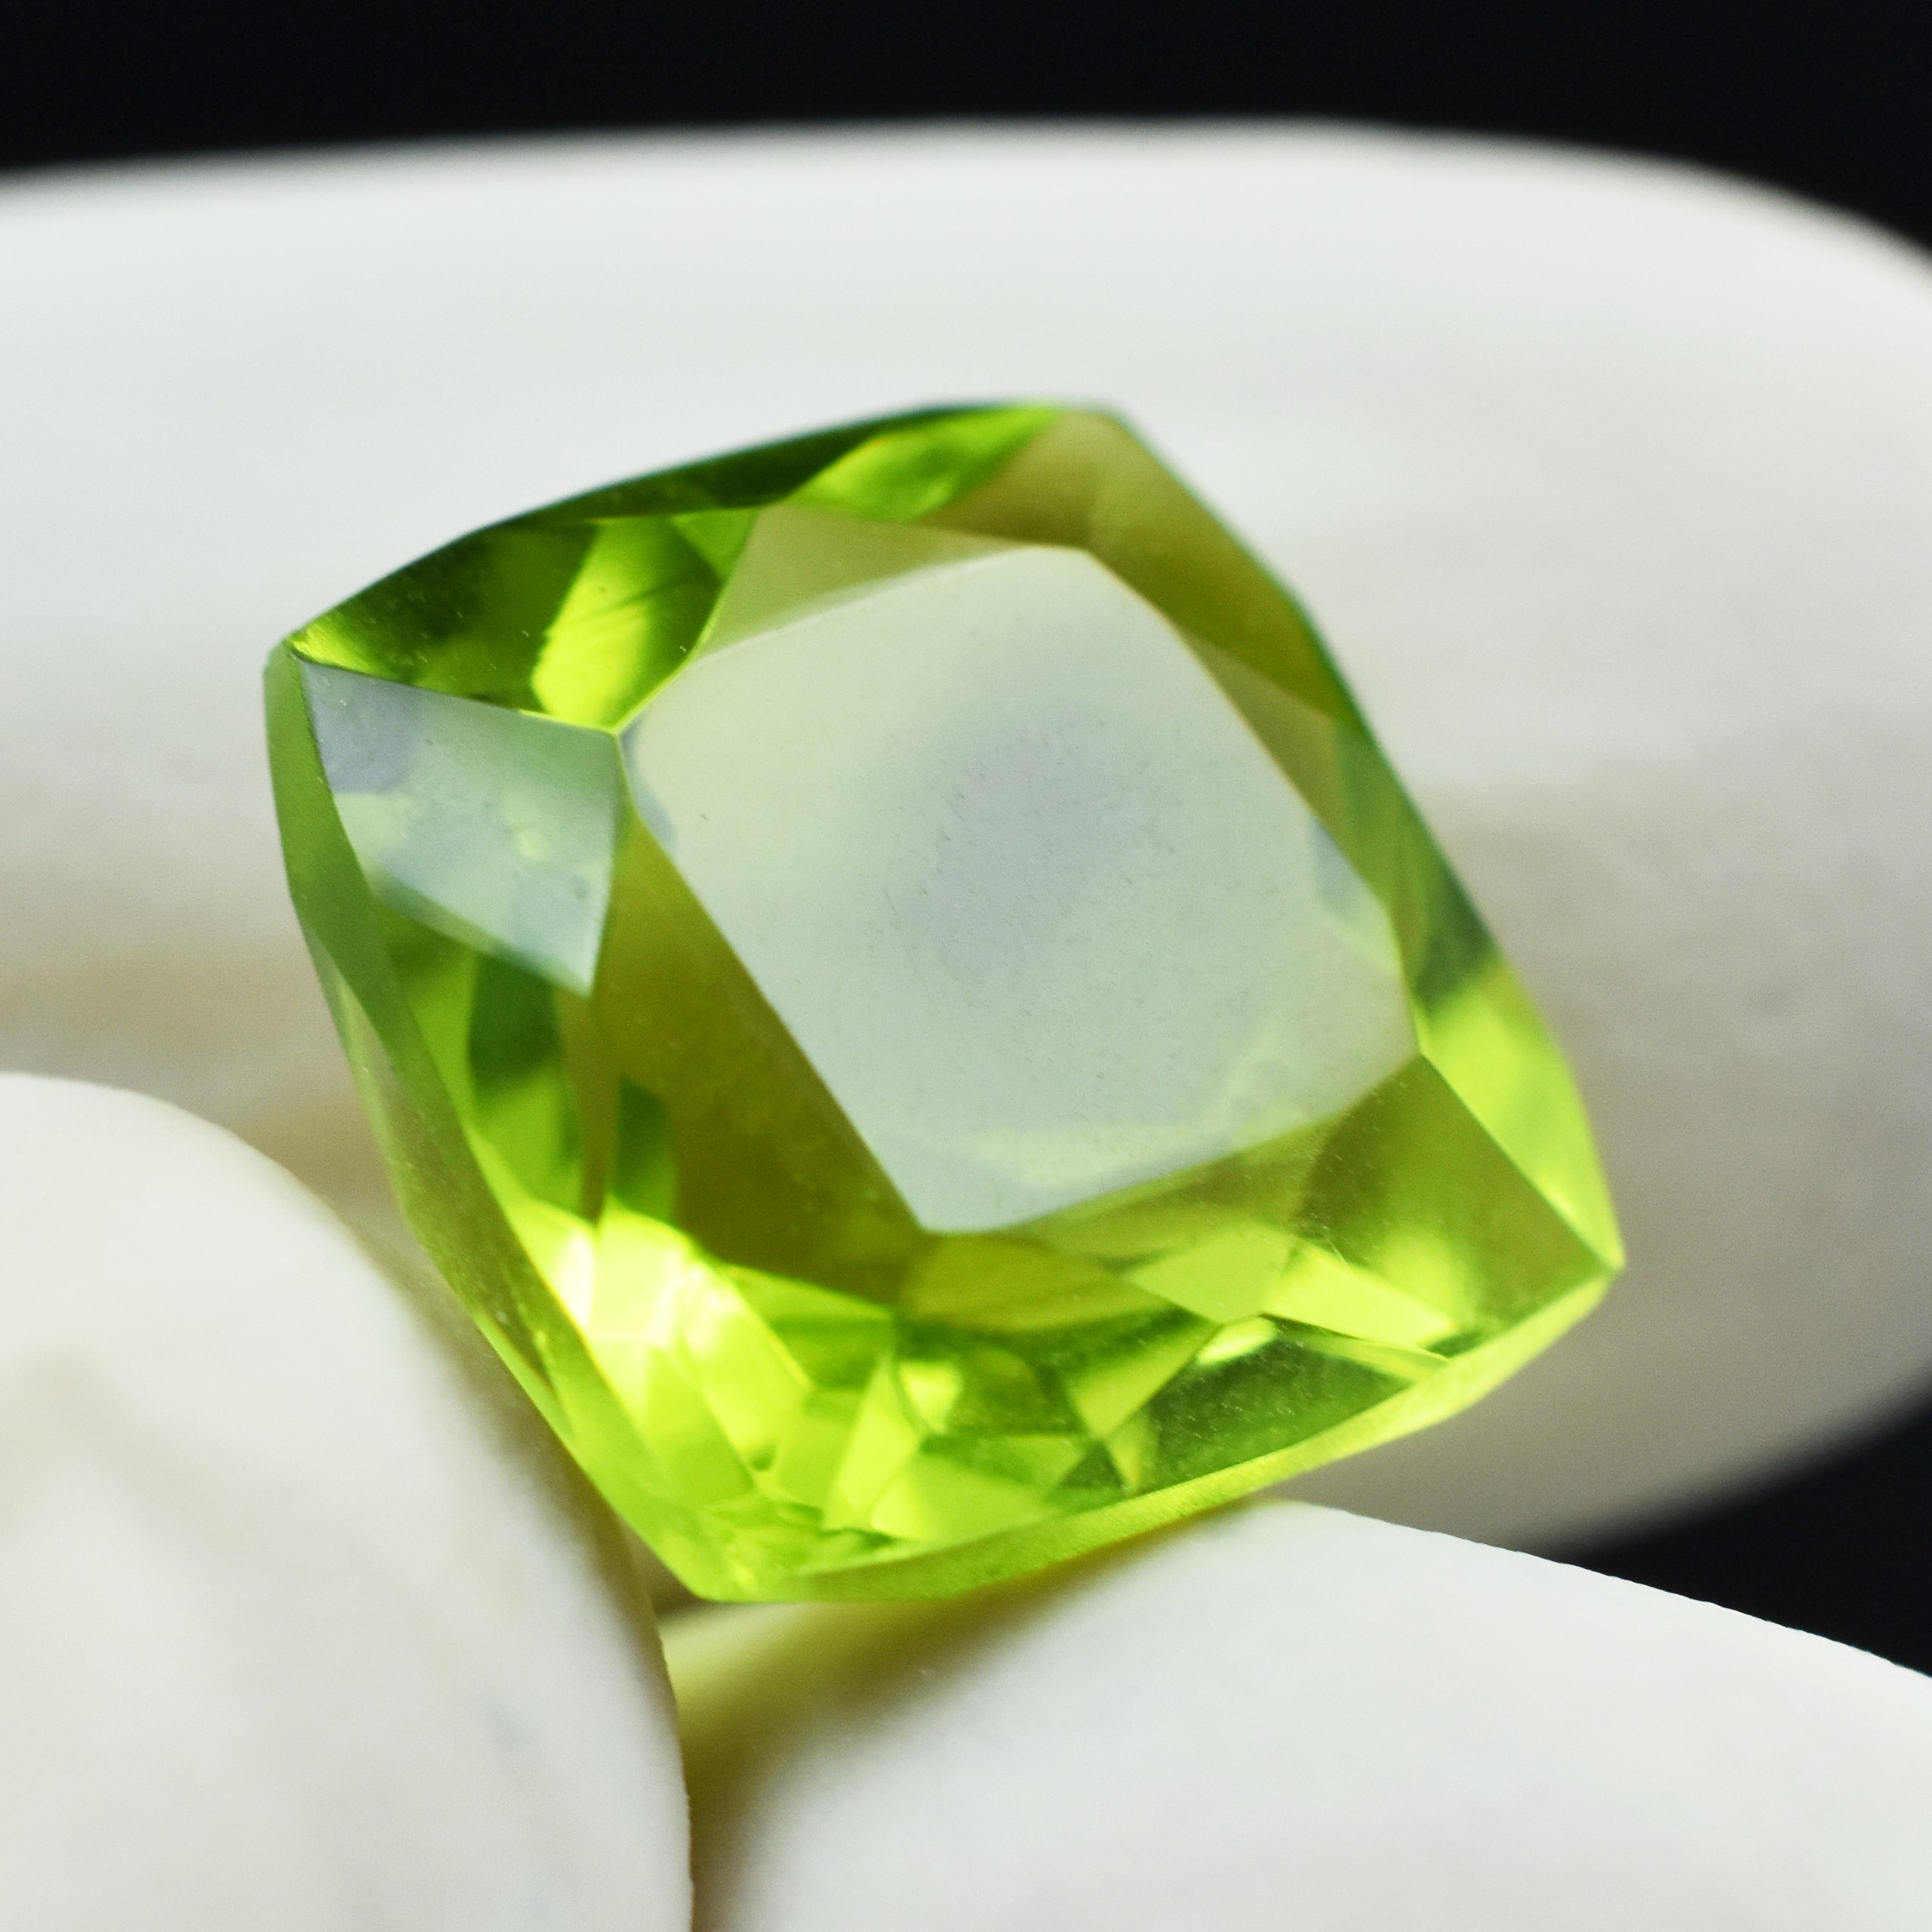 Natural Peridot Square Cushion Cut Peridot Green 10.23 Carat CERTIFIED Ring Size Peridot Ring Size Loose Gemstone August Birthstone Gemstone Best Gift -Free Delivery Free Gift